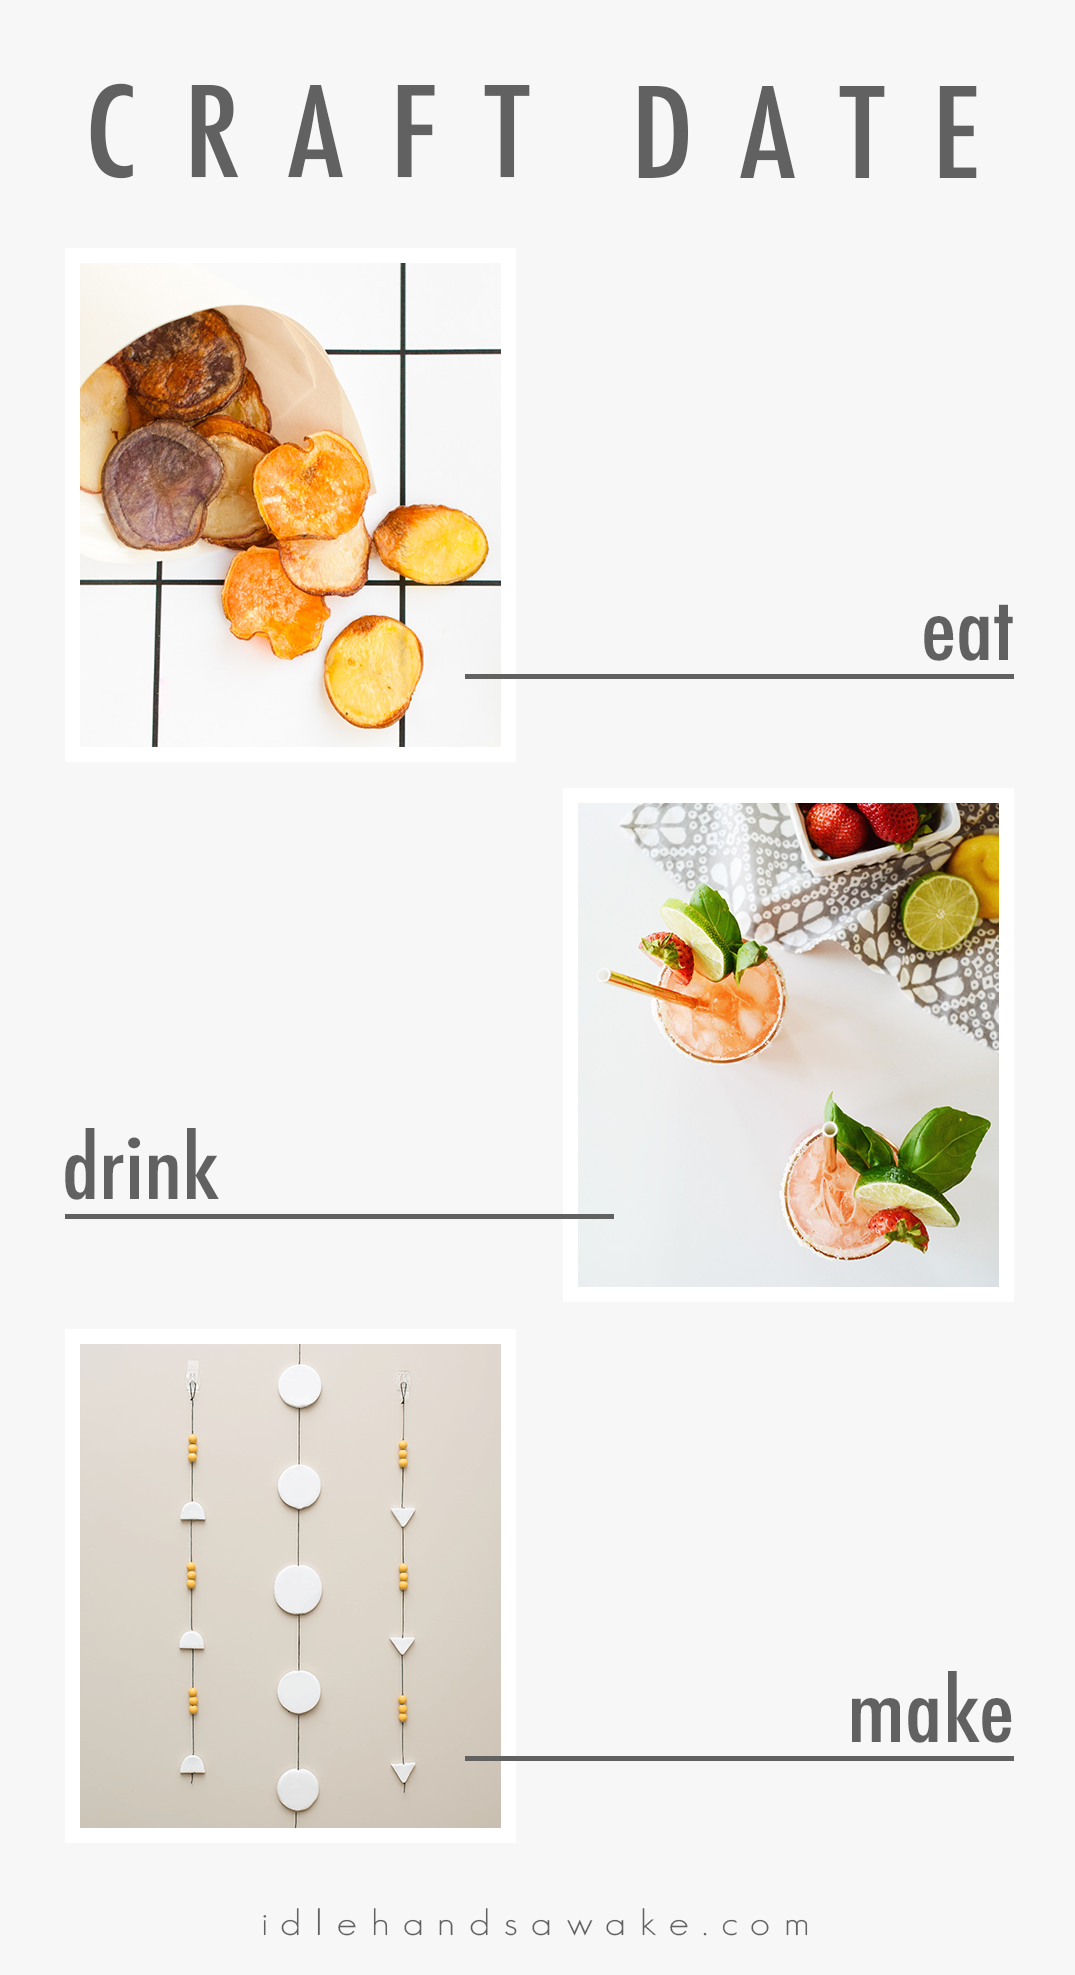 Grab your friends and have a craft date! Make these simple snacks, drinks, and crafts together for a fun weekend activity.